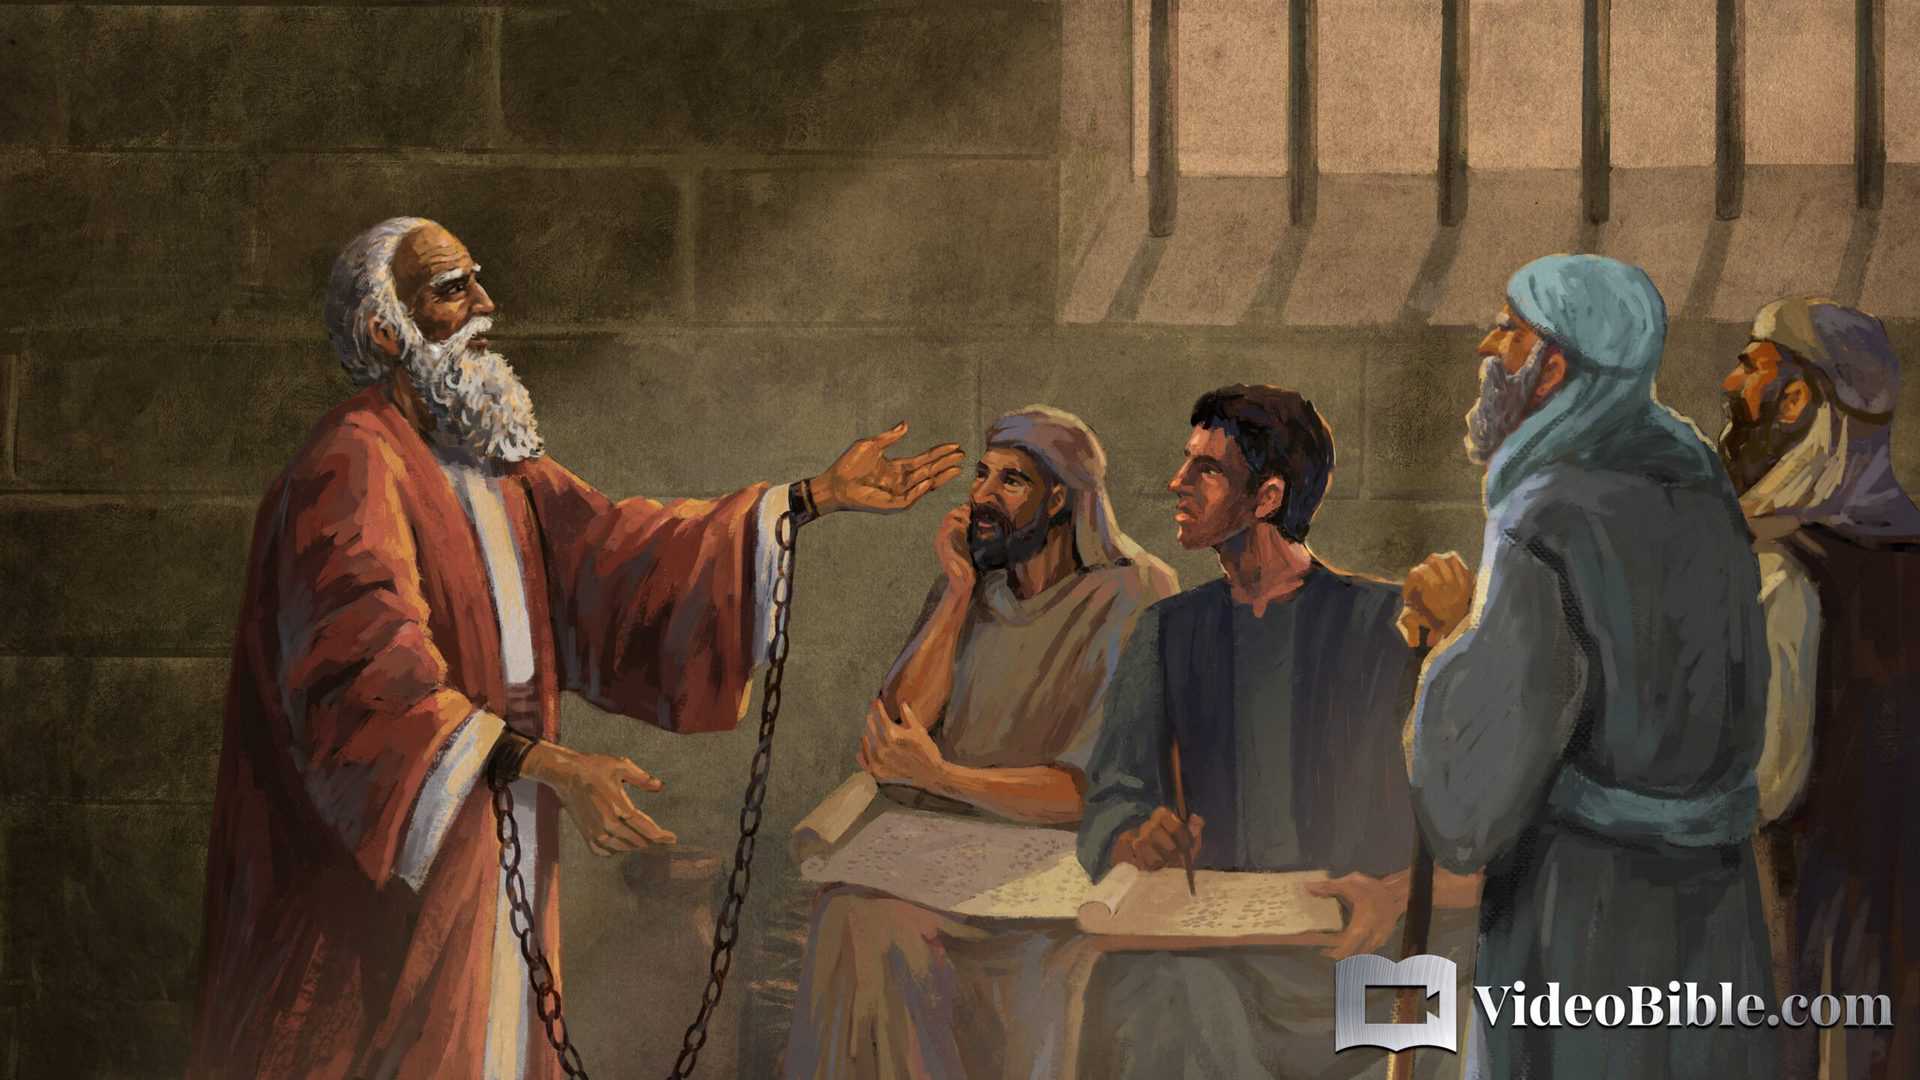 The Apostle Paul preaching to Timothy and the elders in prison